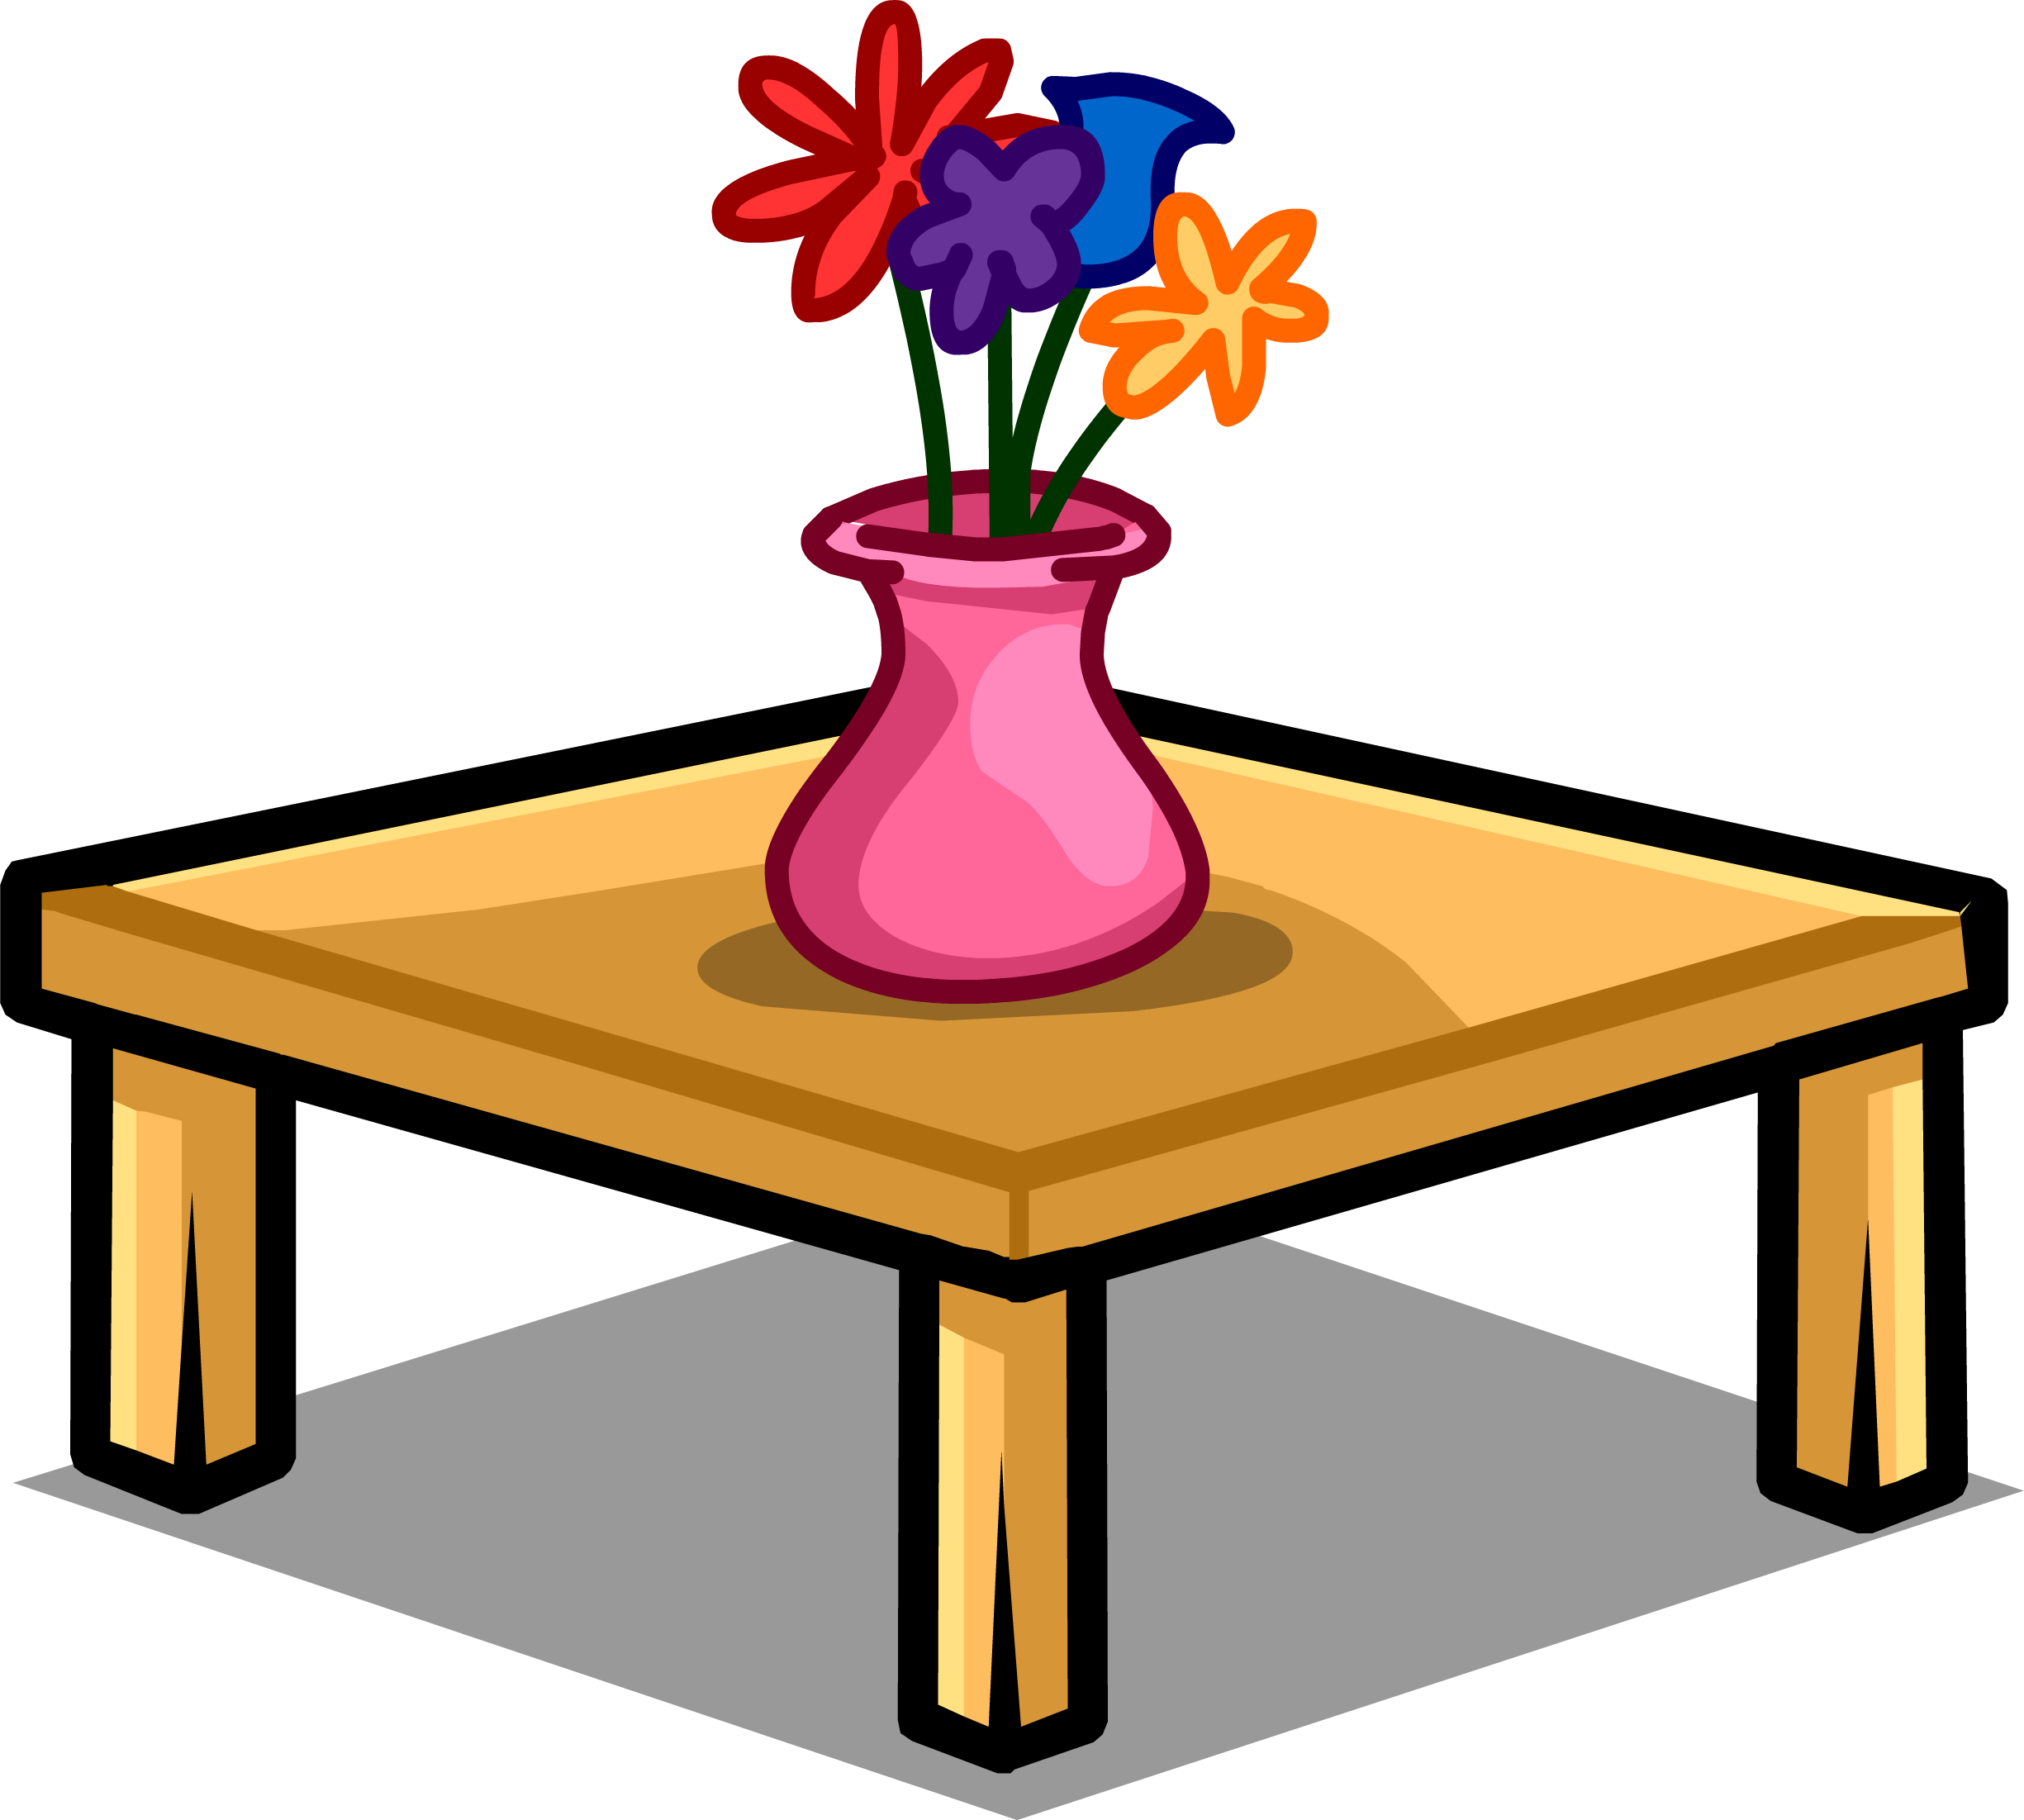 A Cartoon Of Flowers In A Vase On A Table